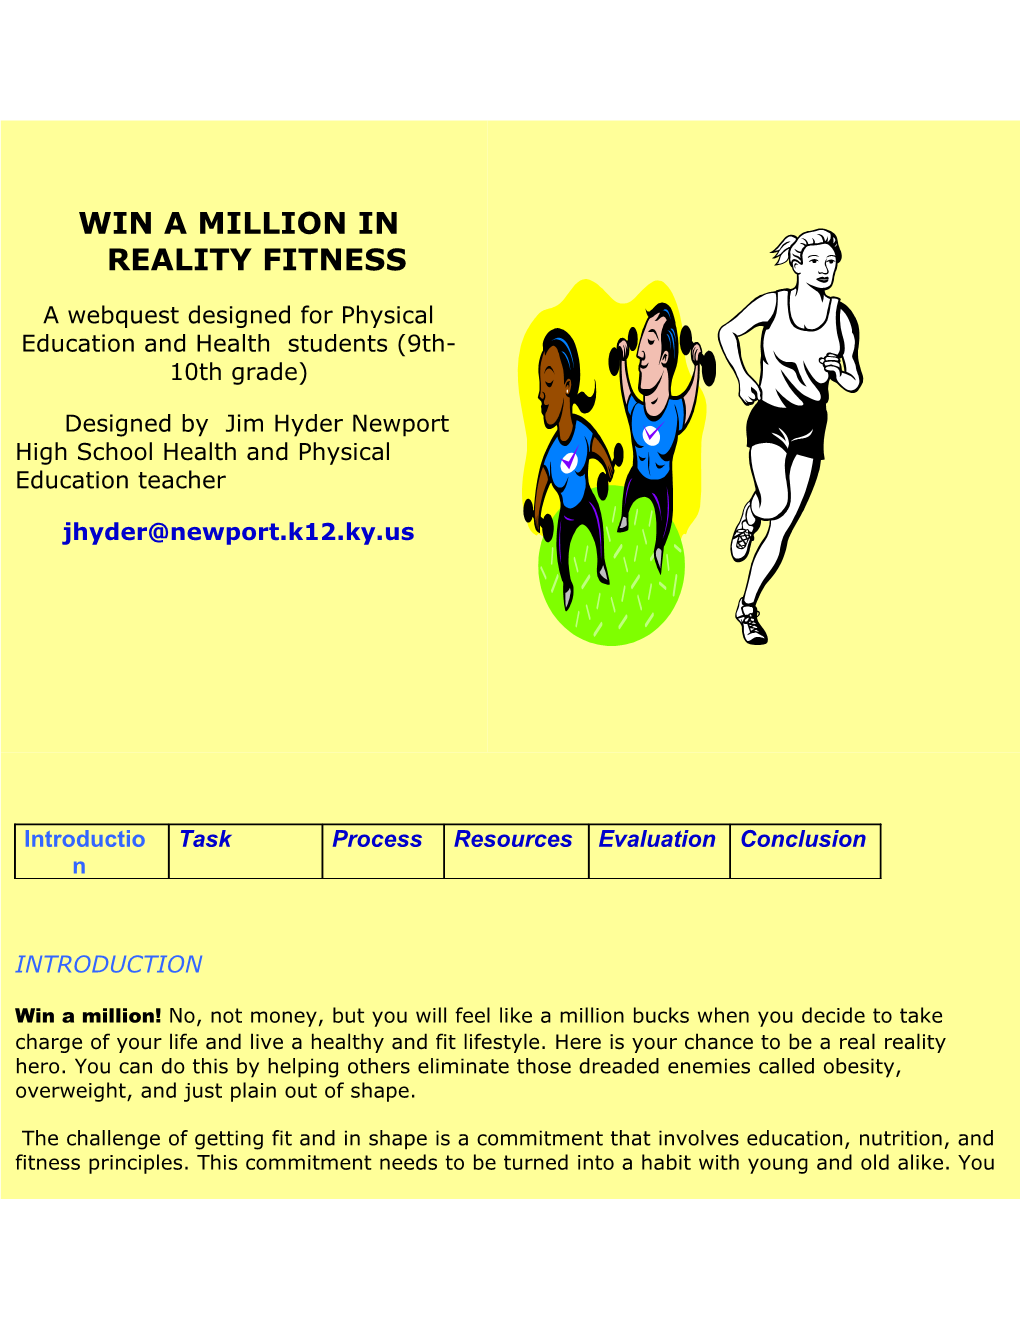 Win a Million in Reality Fitness